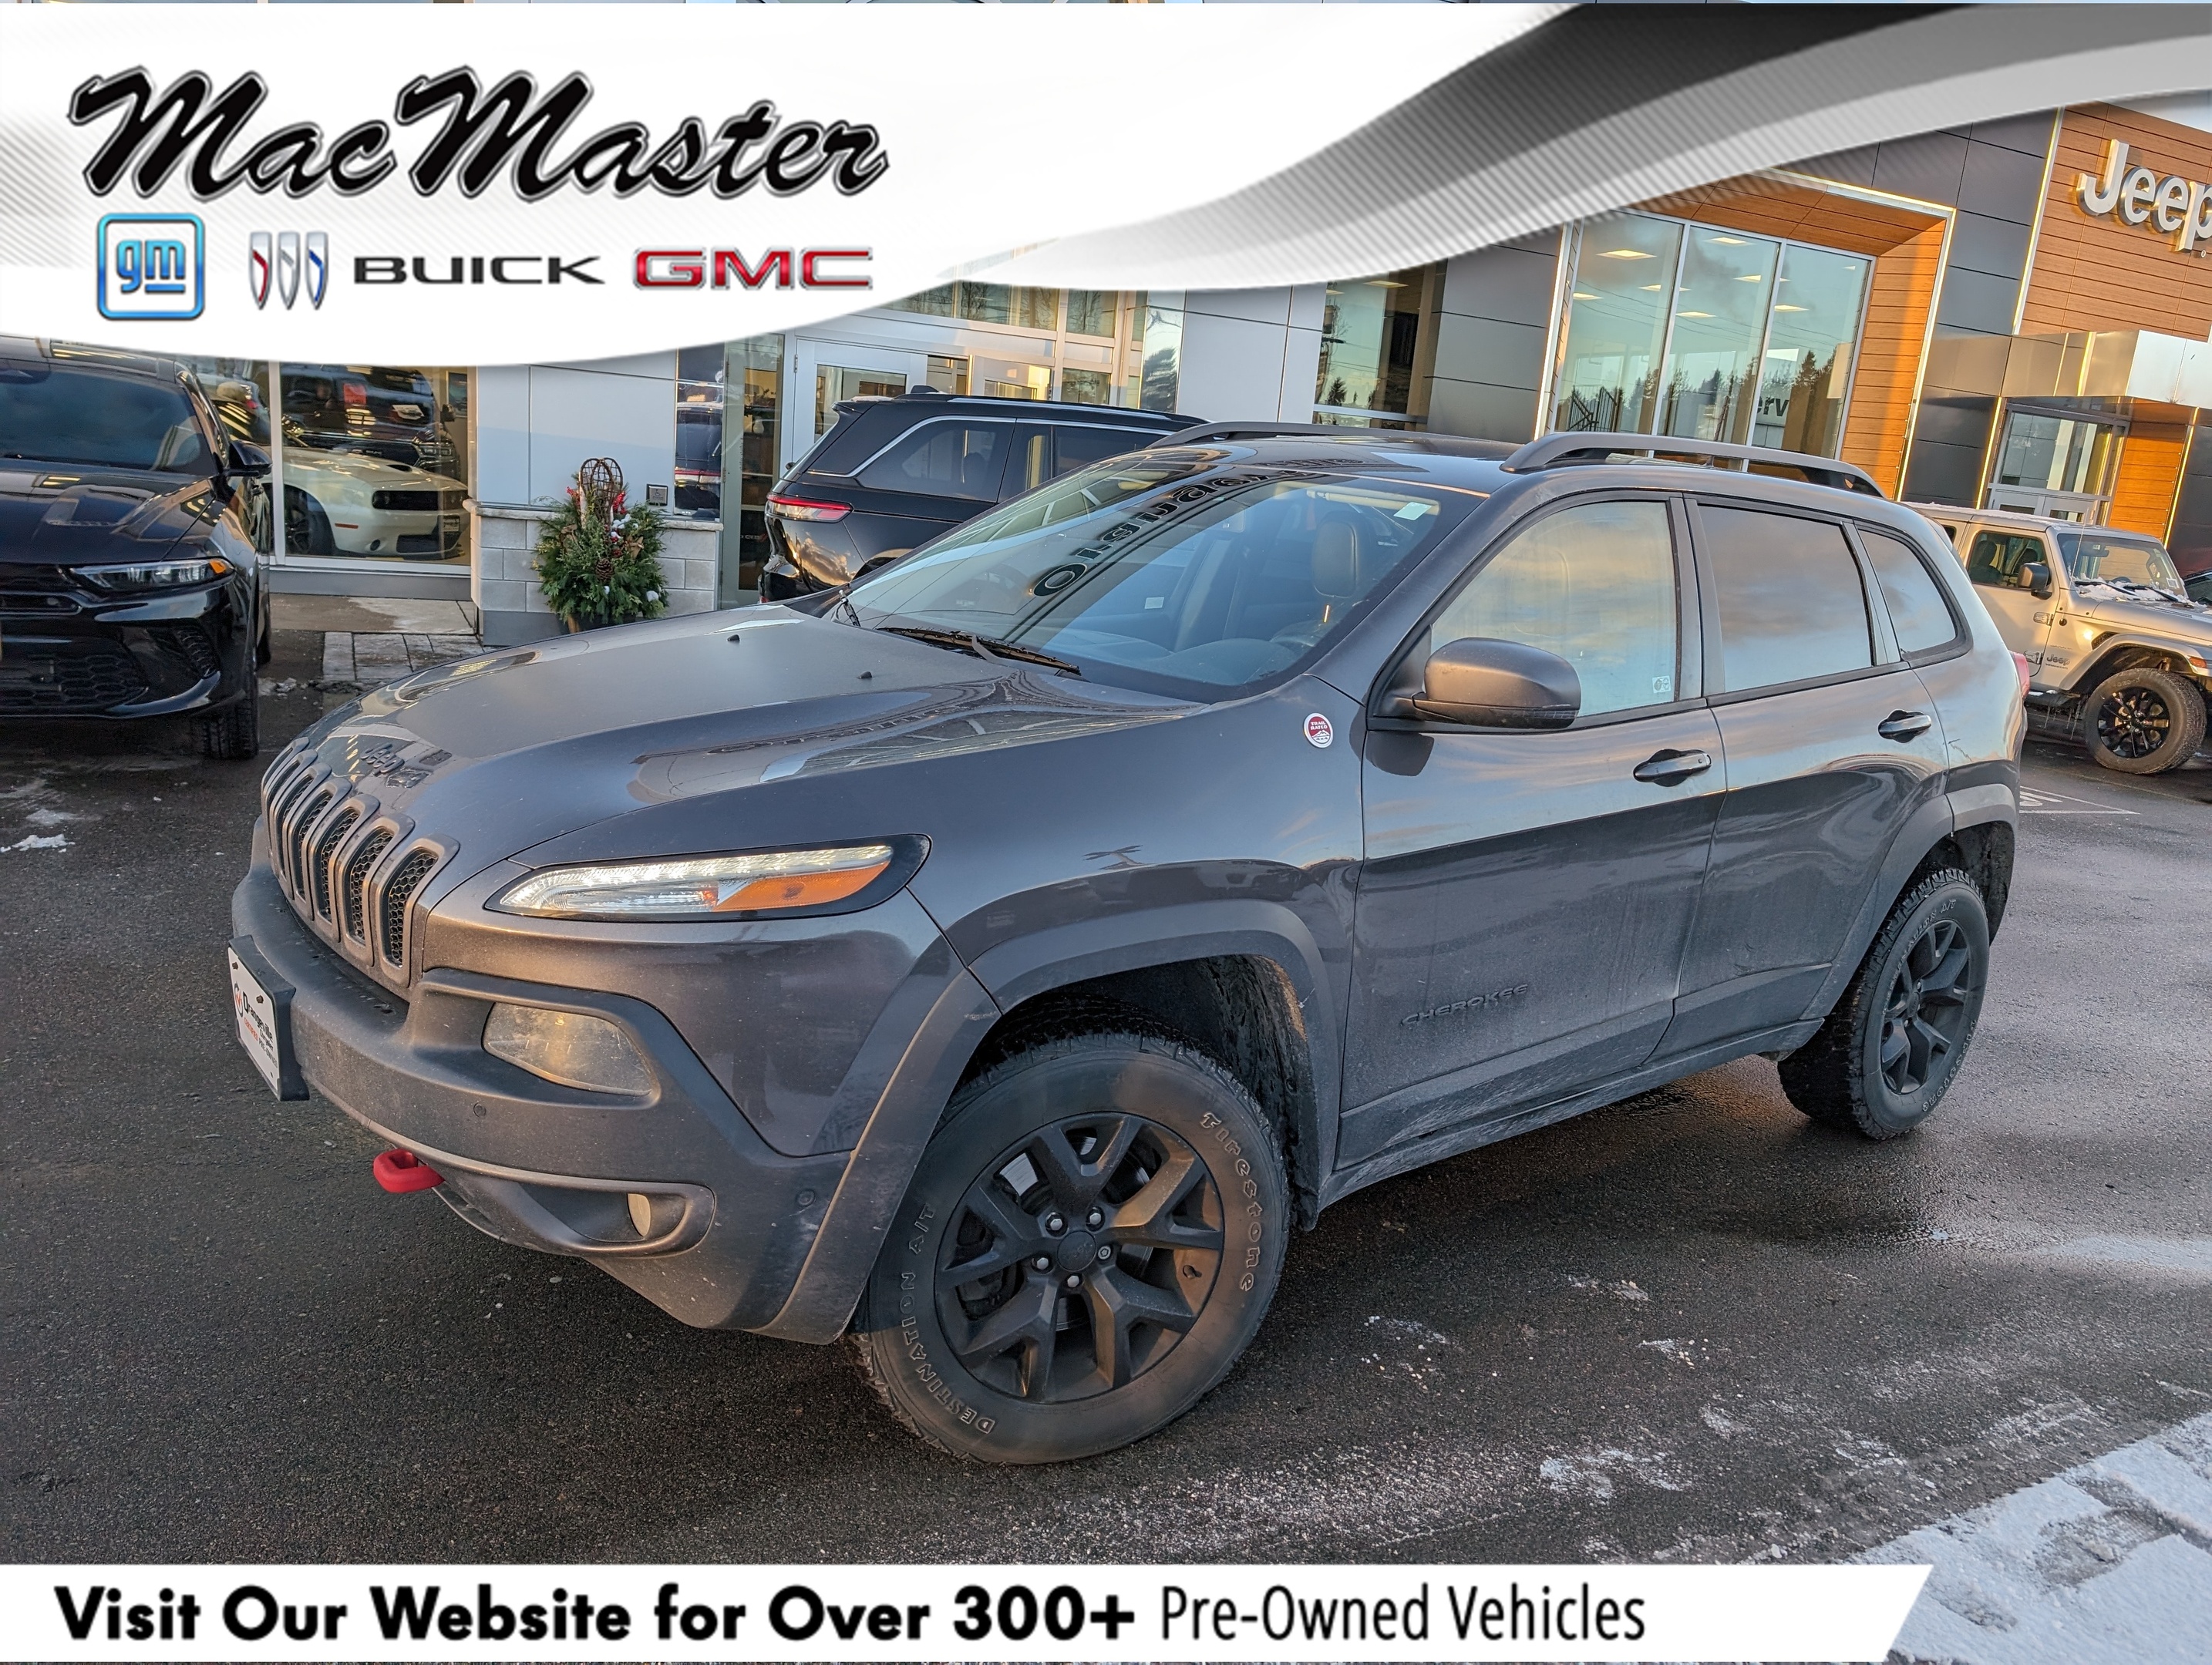 2018 Jeep Cherokee TRAILHAWK LEATHER PLUS, 4X4, NAV, LOADED, 1-OWNER!